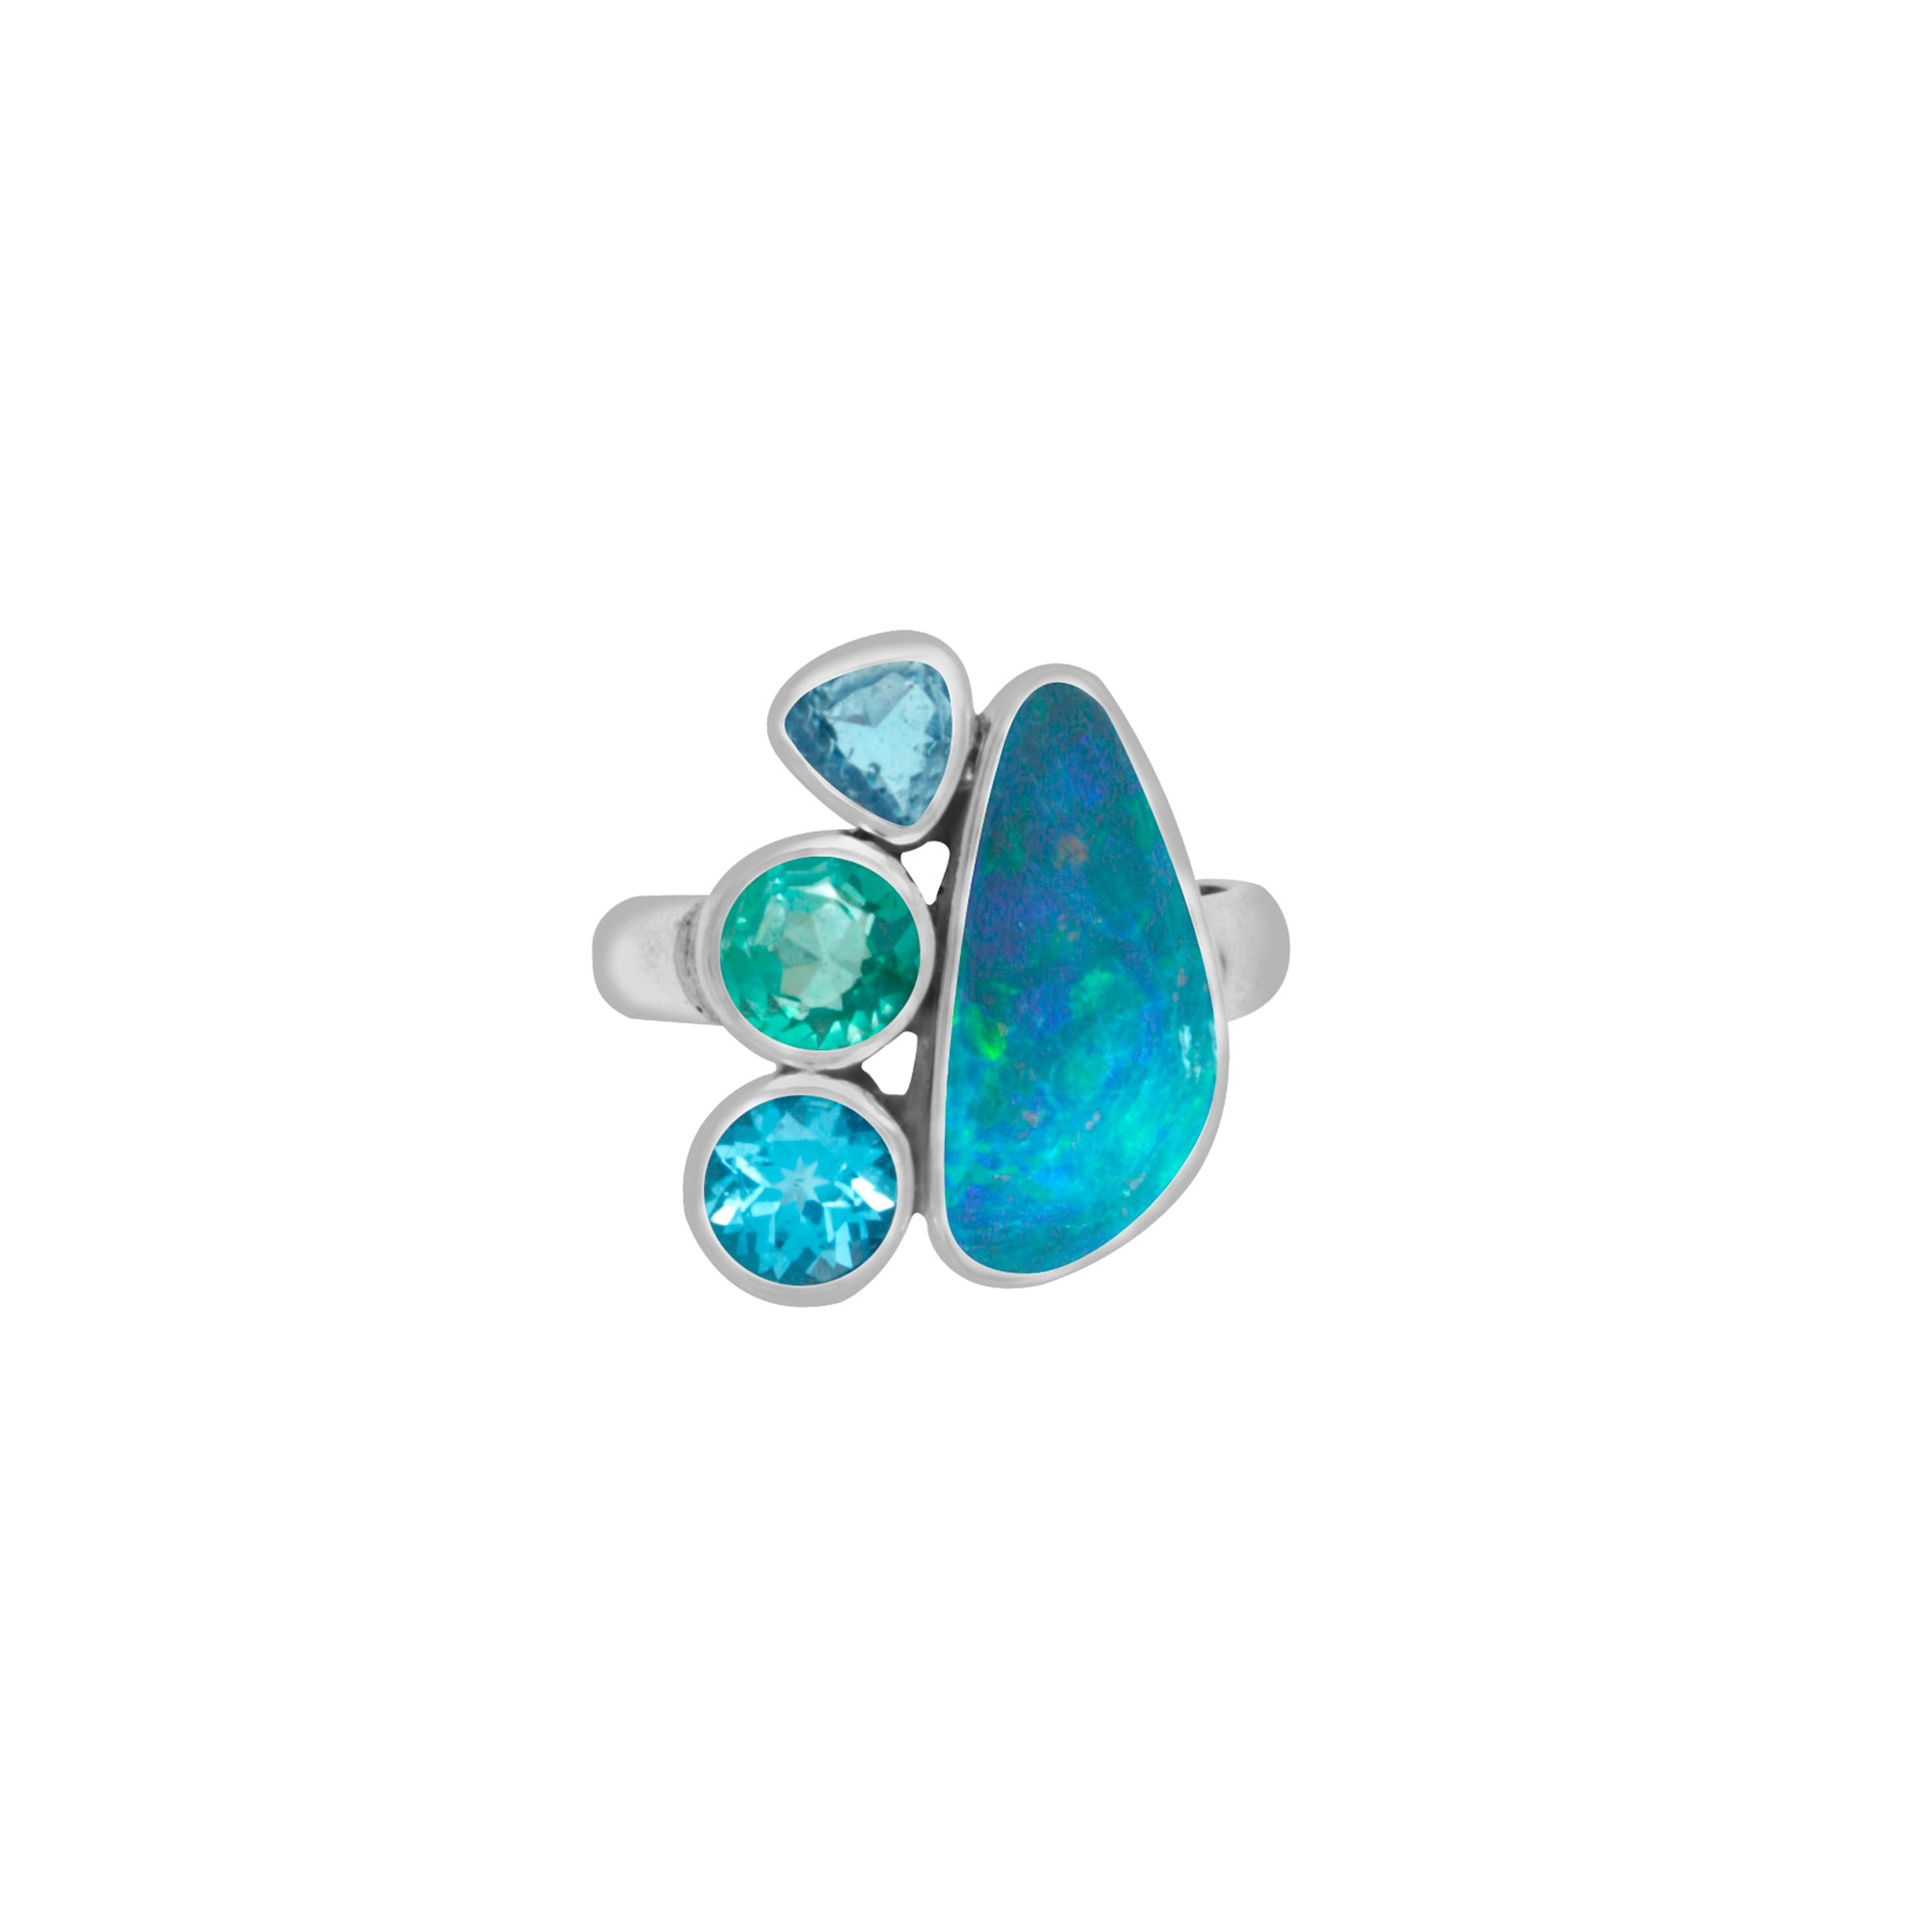 Stunning Opal Ring with Blue and Green Topaz